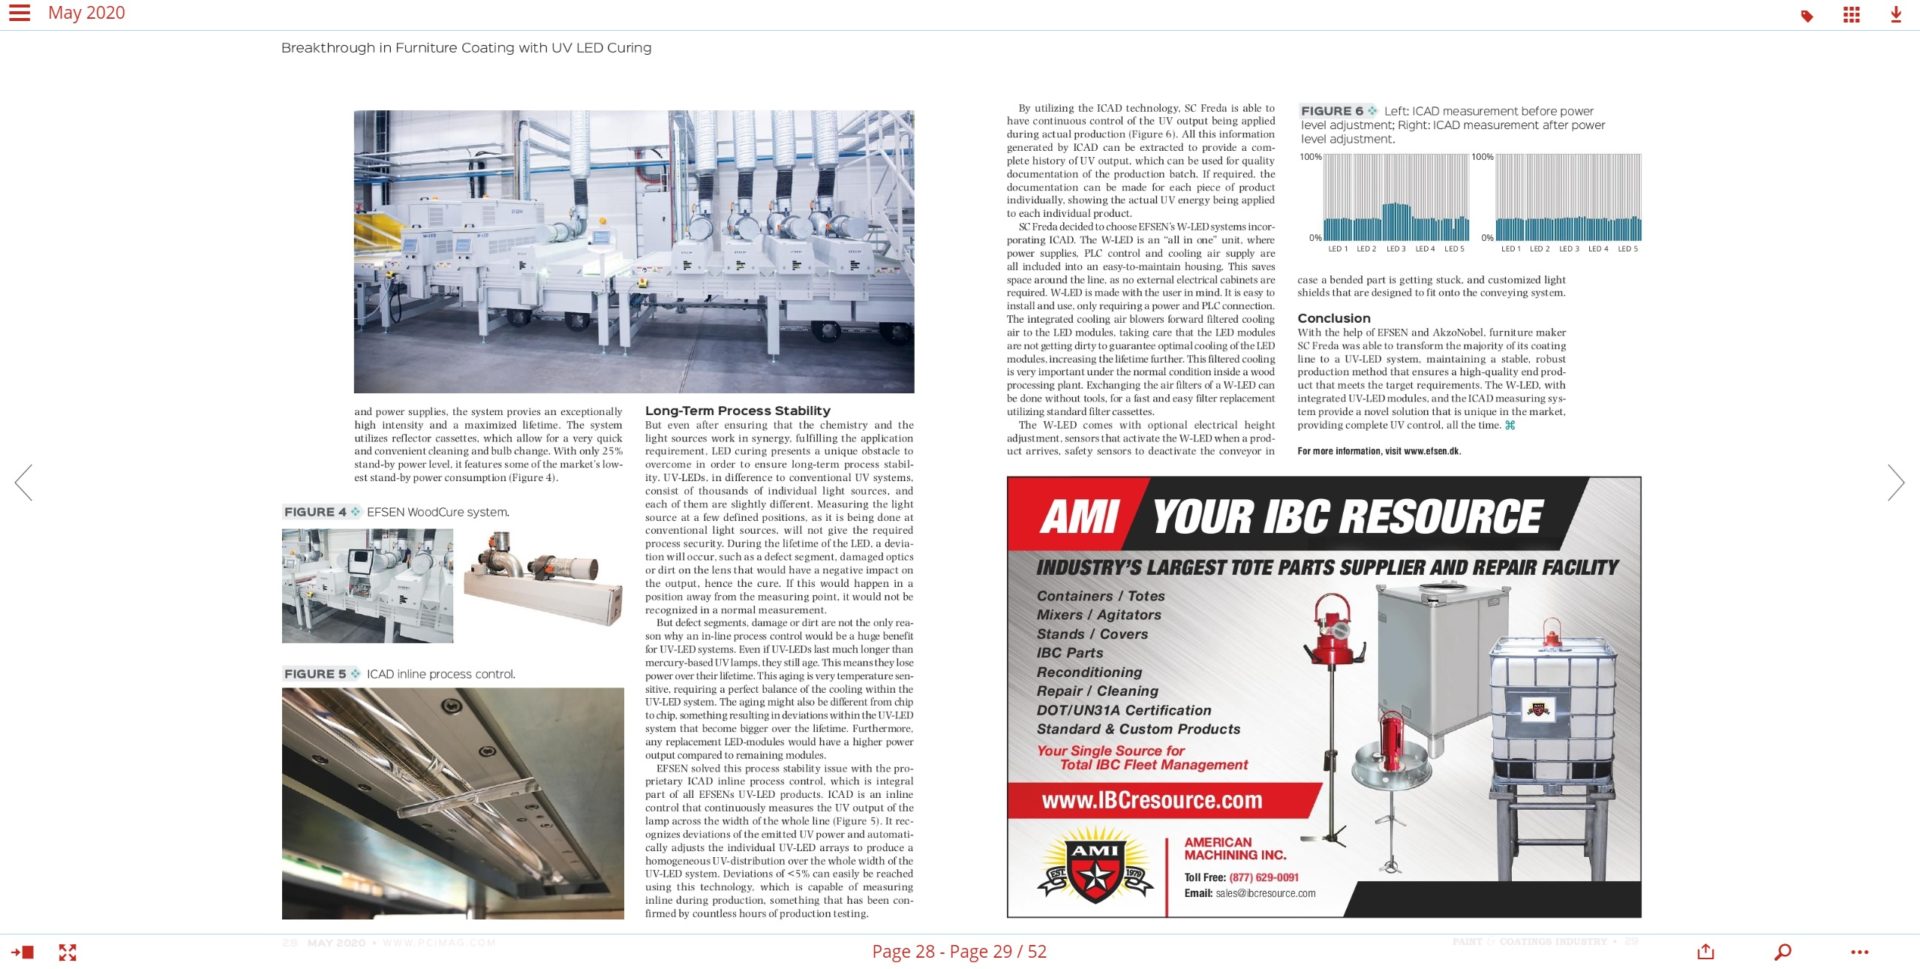 Breakthrough in Furniture Coating with UV LED Curing_PCI_May 2020_Page 28